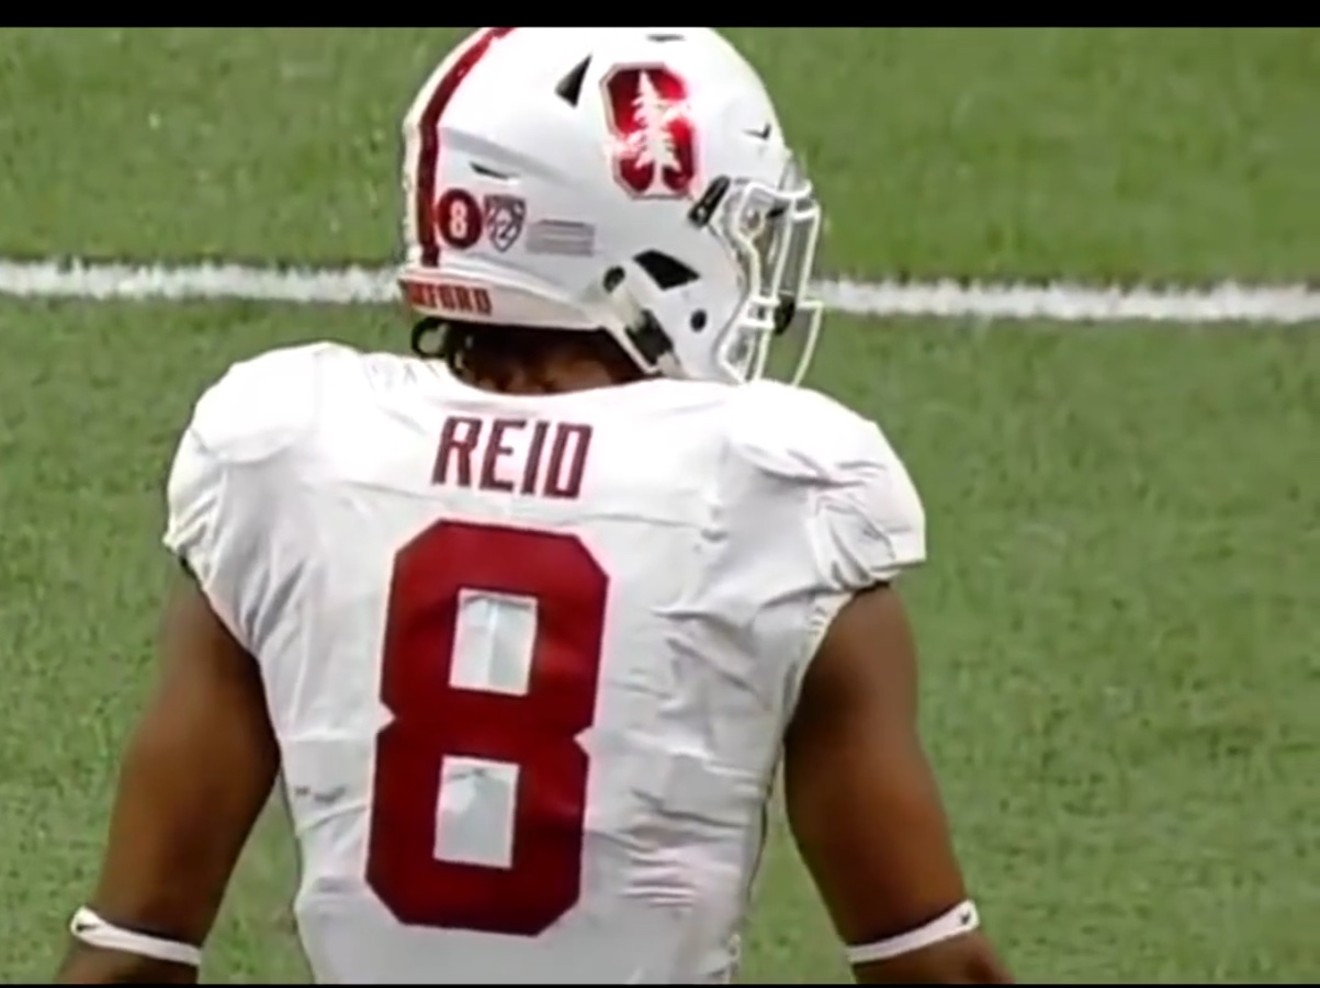 The Texans' top pick in this year's draft was a safety, Justin Reid from Stanford.